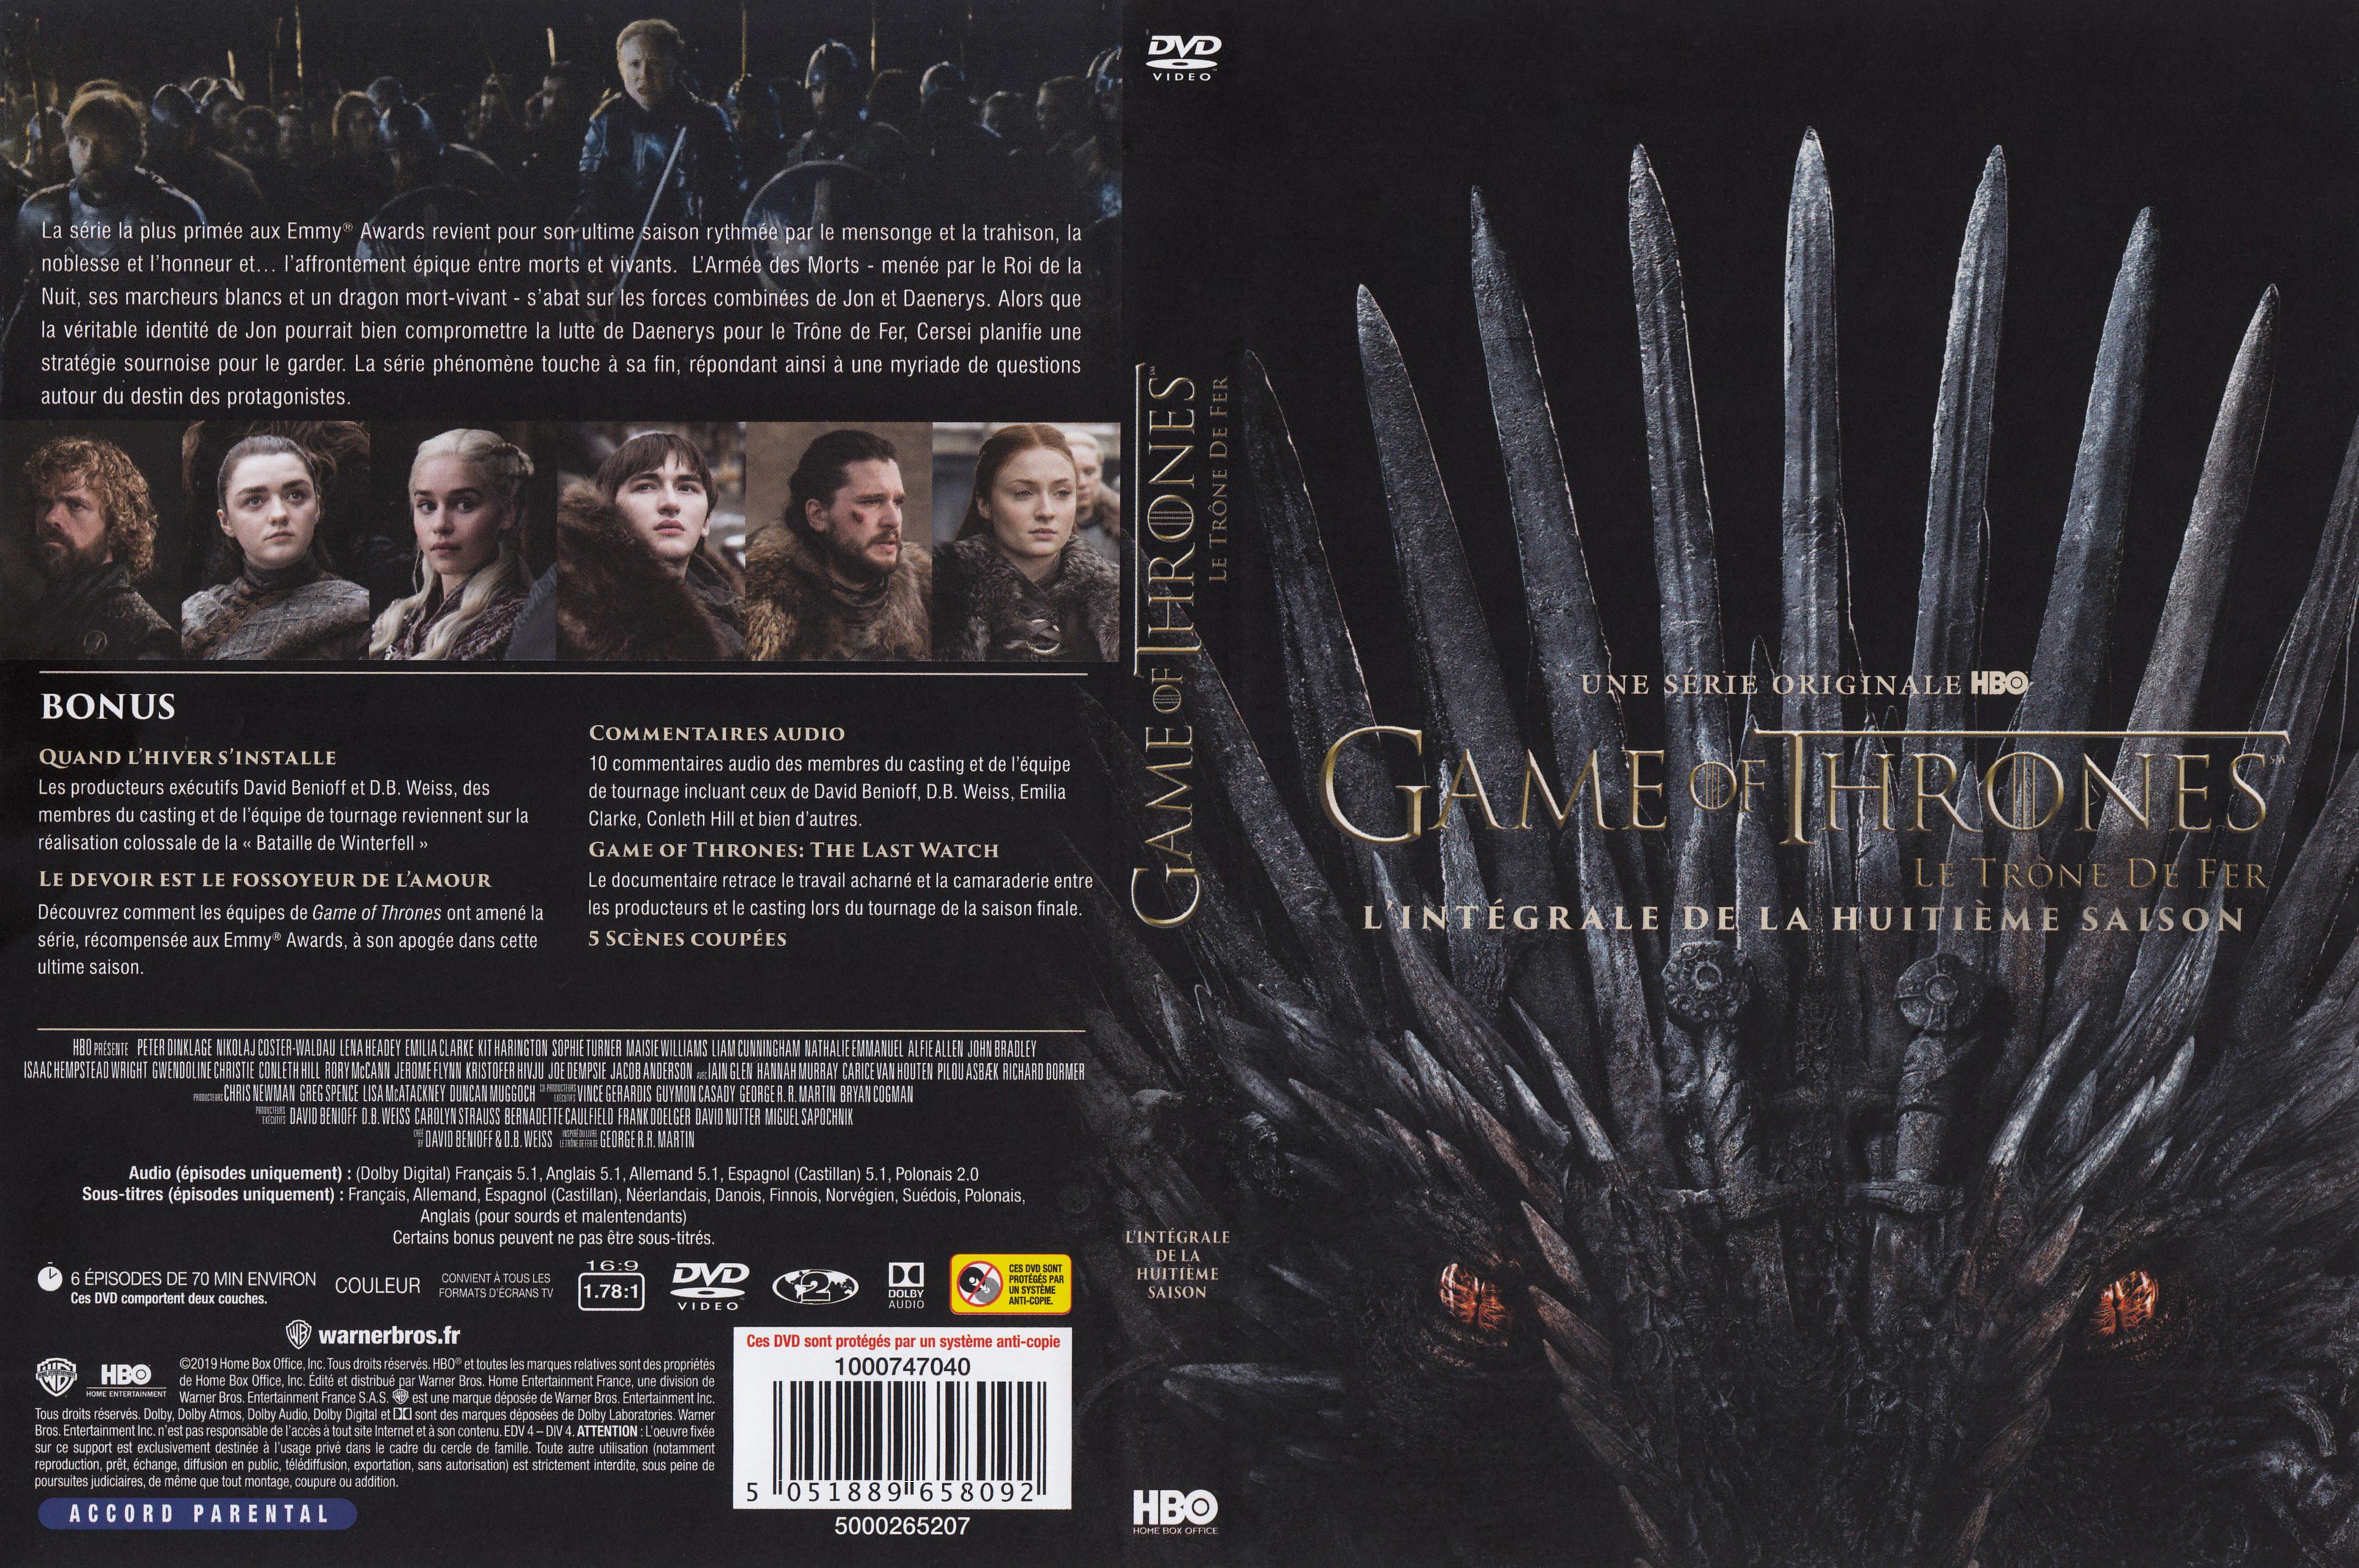 Jaquette DVD Game of thrones Saison 8